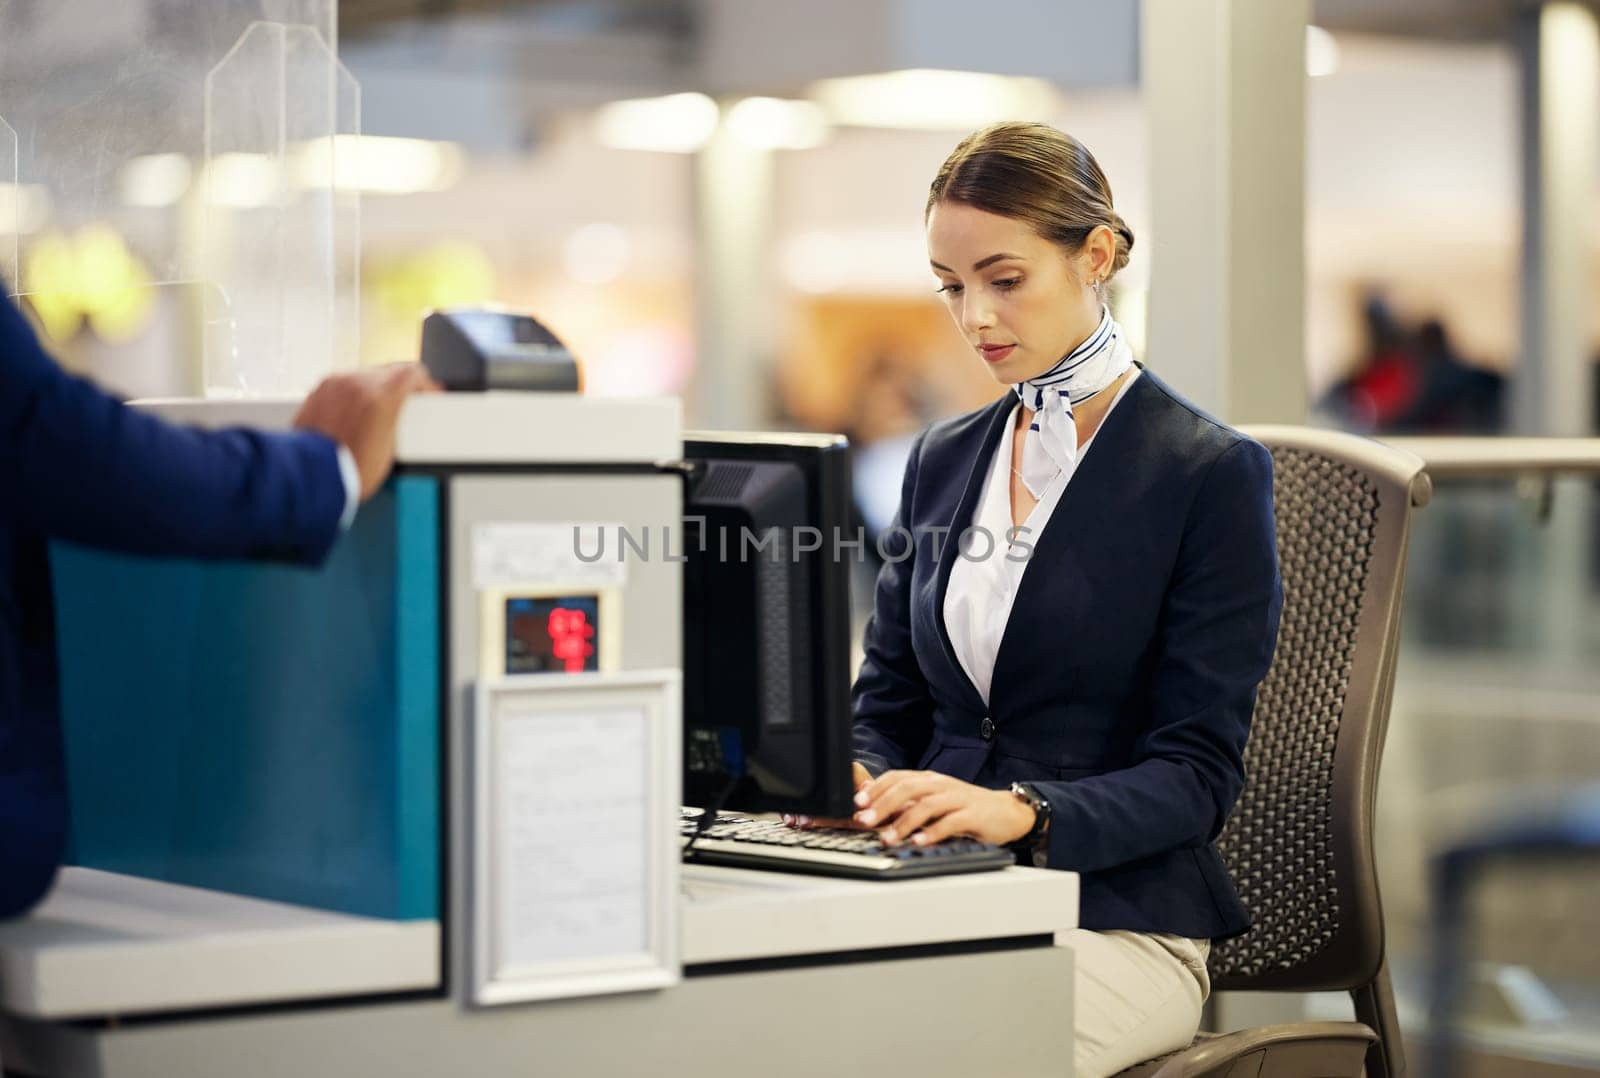 Airport, check in desk and woman typing for security, identity and travel documents for border immigration service. Concierge, customer service and help for global transportation with pc on table.